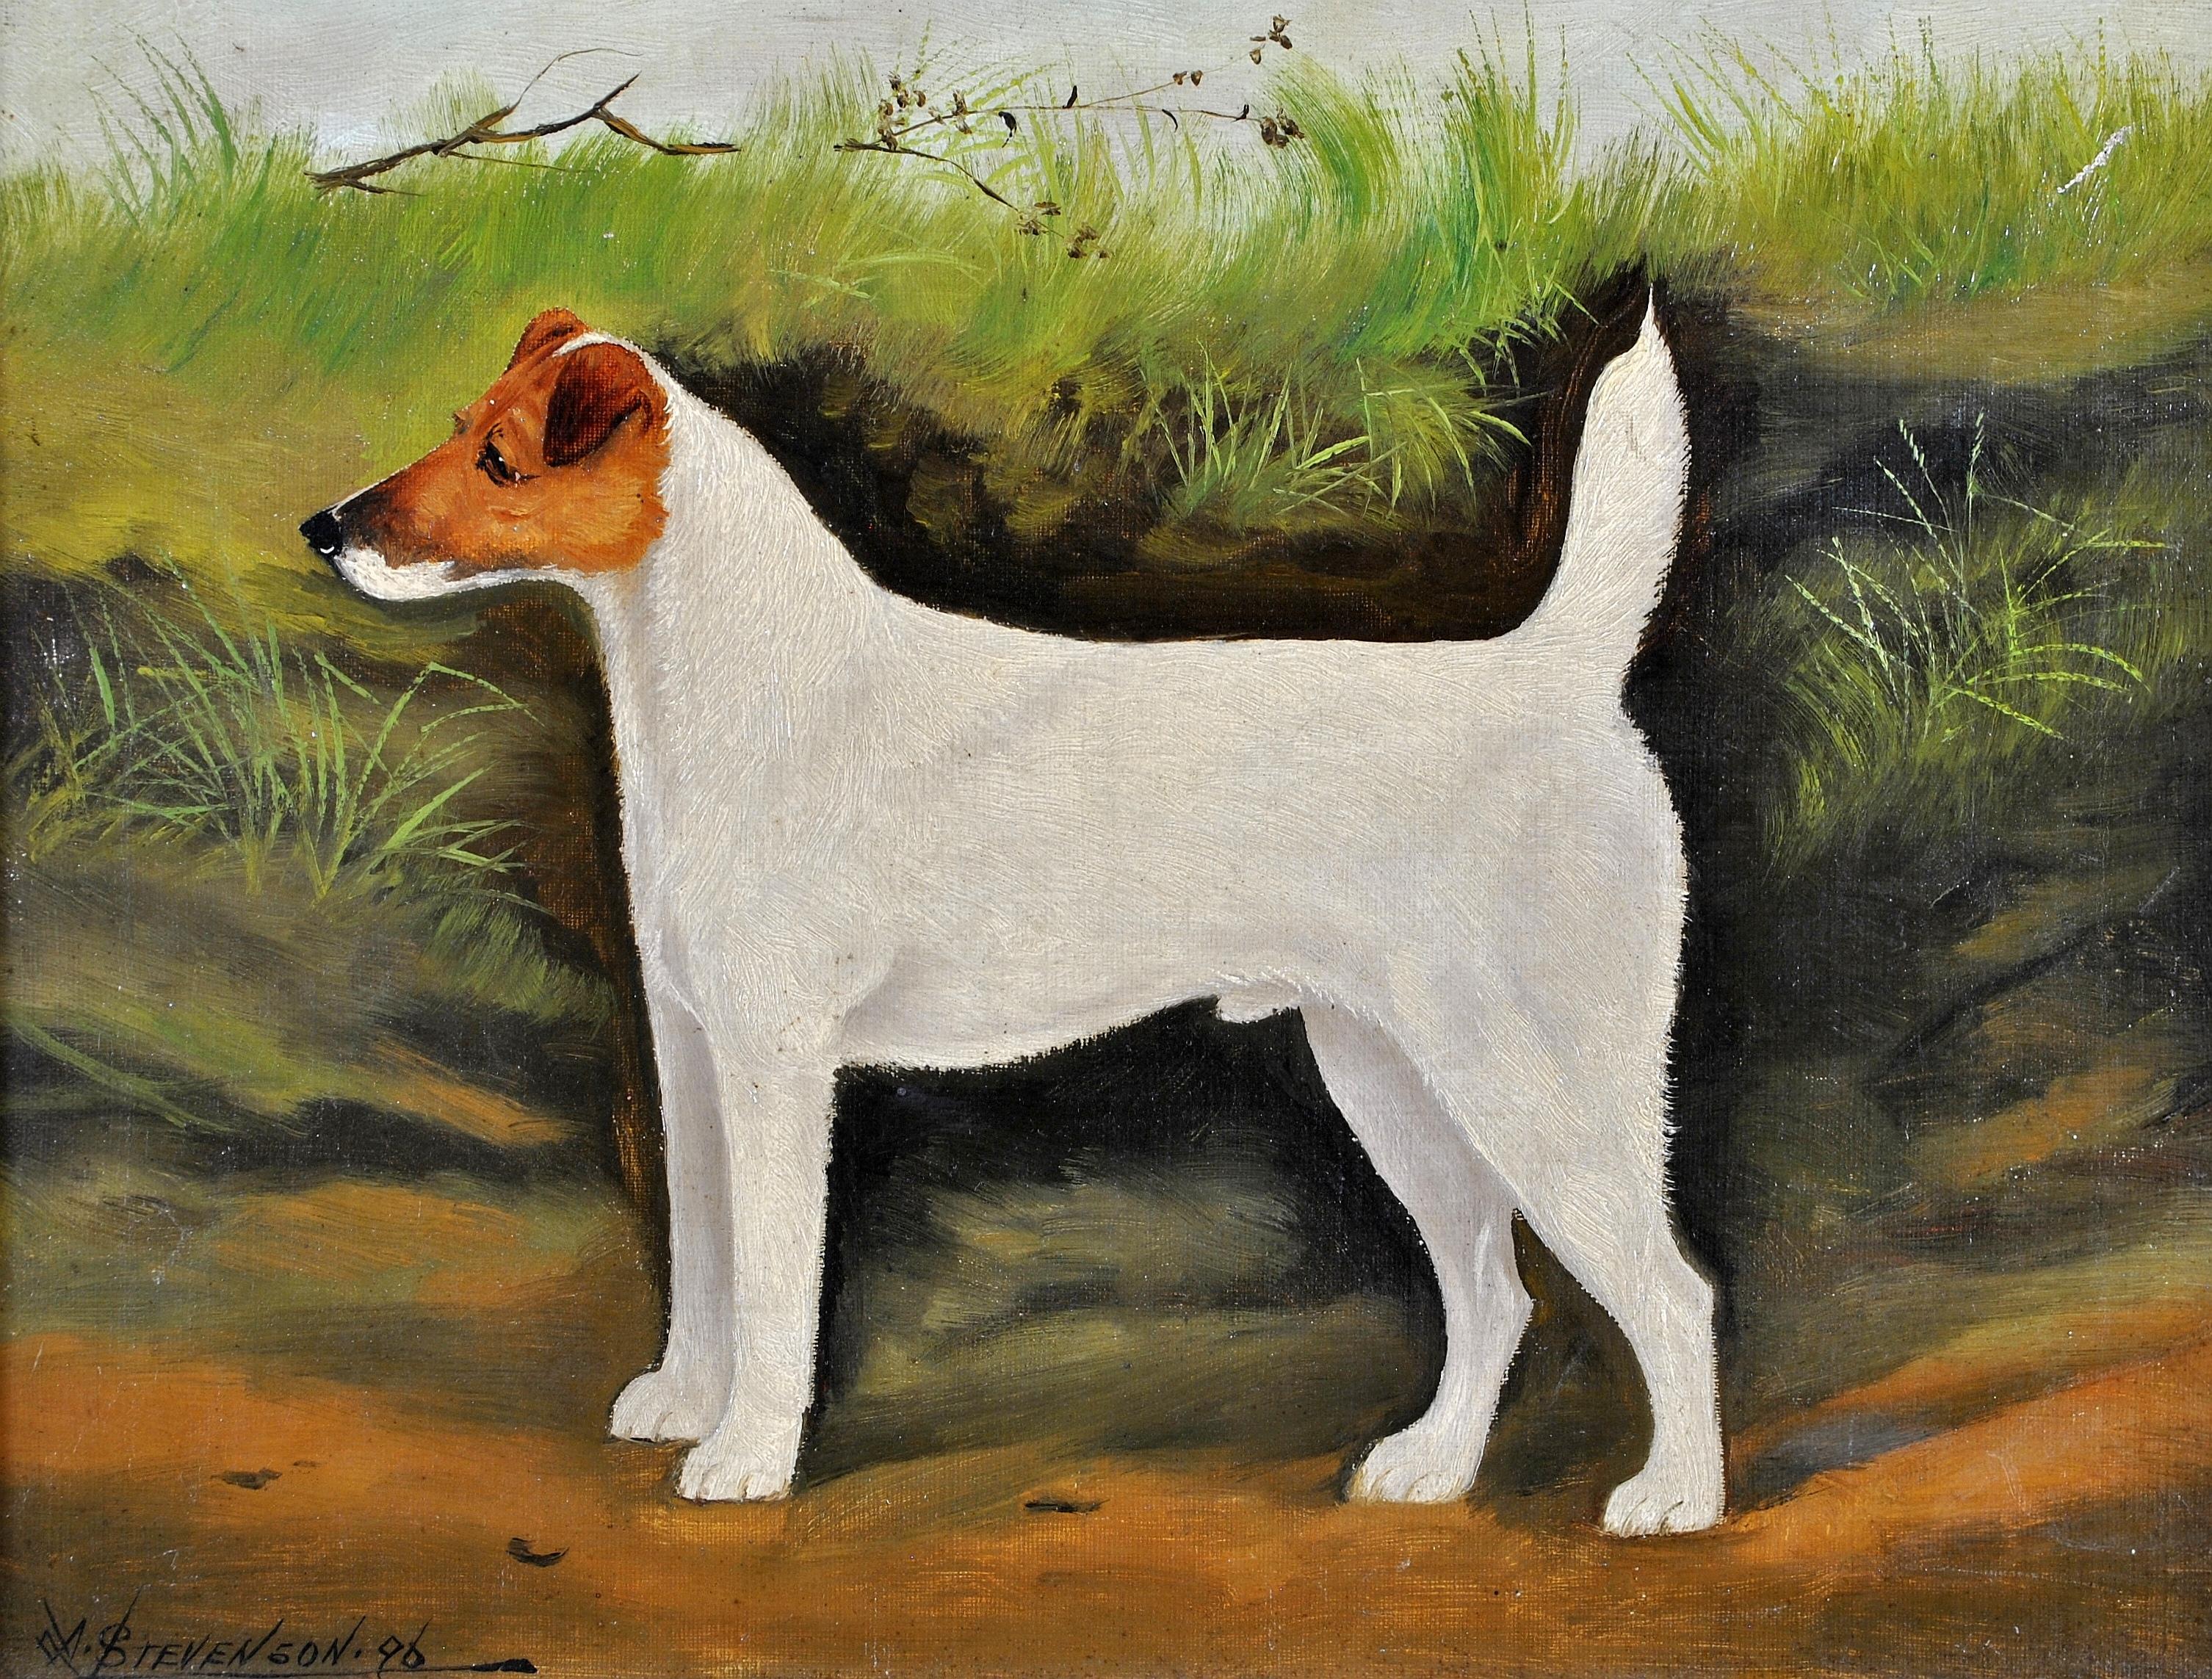 A beautiful signed and dated 1896 oil on canvas portrait of a terrier dog in a landscape, by A. Stevenson. One of a pair that we are listing for sale on 1stDibs today.

A. Stevenson was an accomplished painter of dogs, and the occasional horse, who